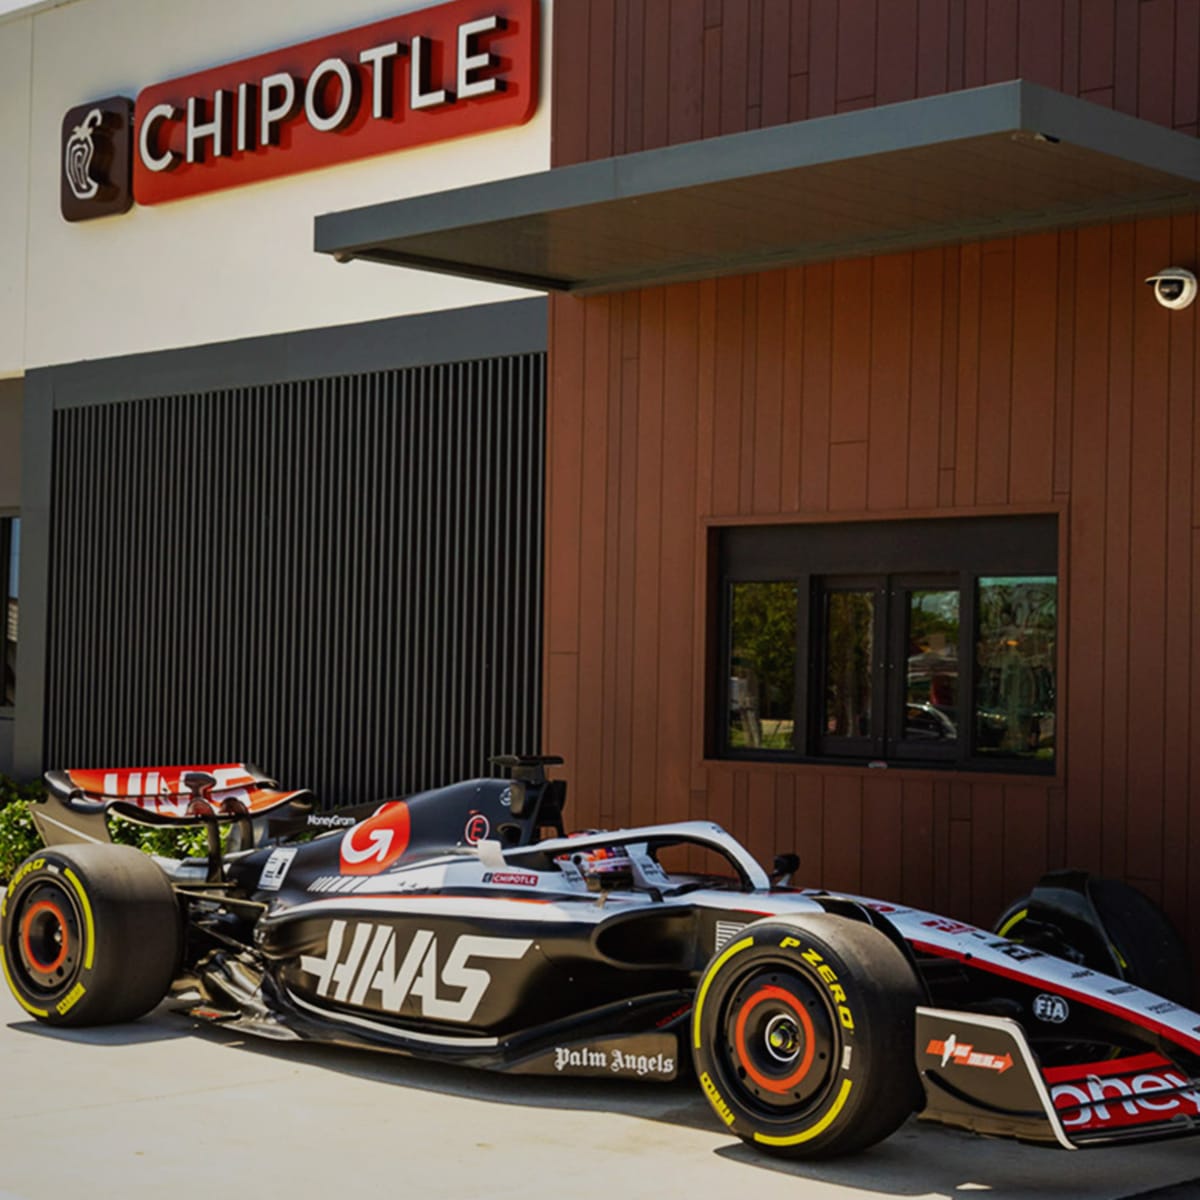 Chipotles sports marketing strategy and partnership with a Formula 1 team 